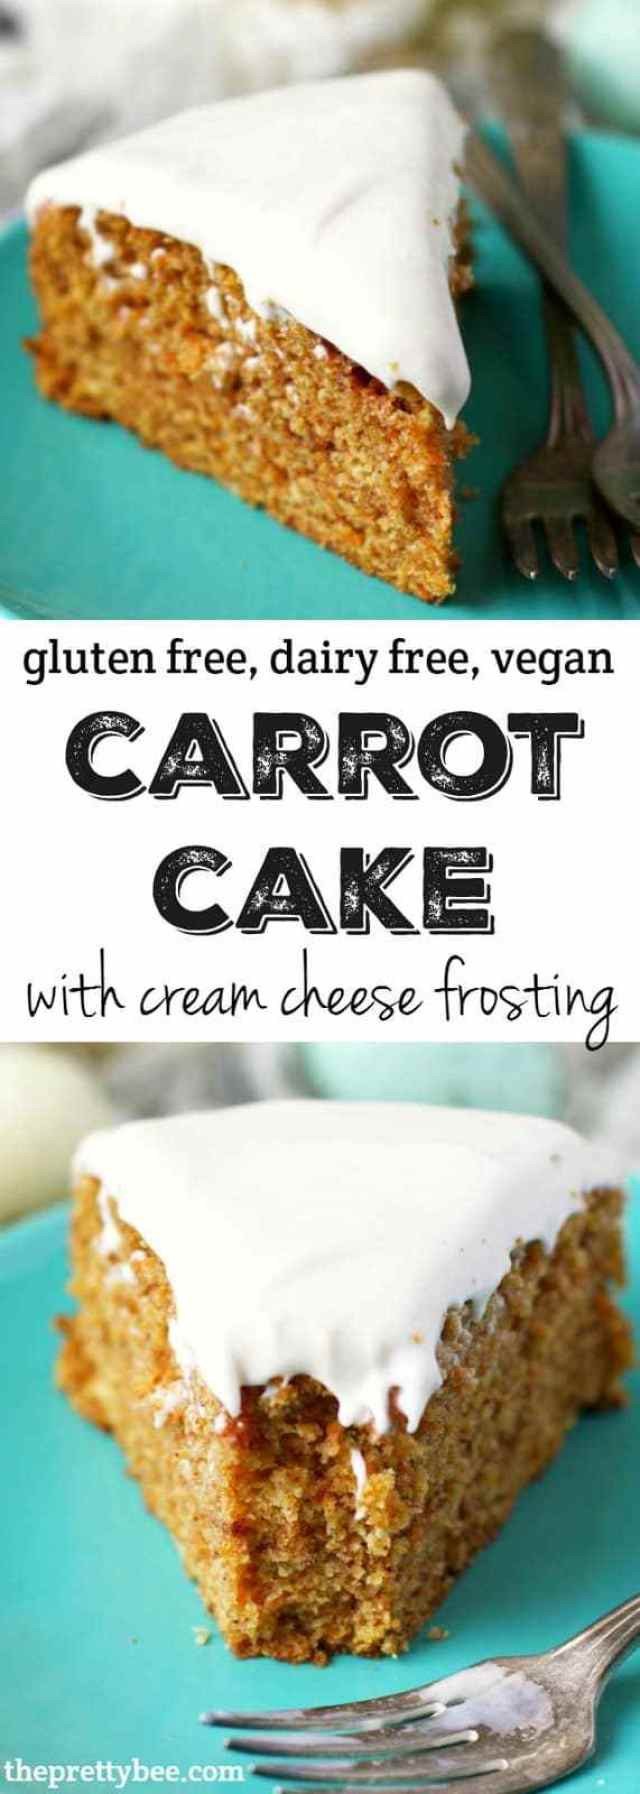 Dairy Free Carrot Cake Frosting
 Carrot Cake with Cream Cheese Frosting Gluten Free Vegan